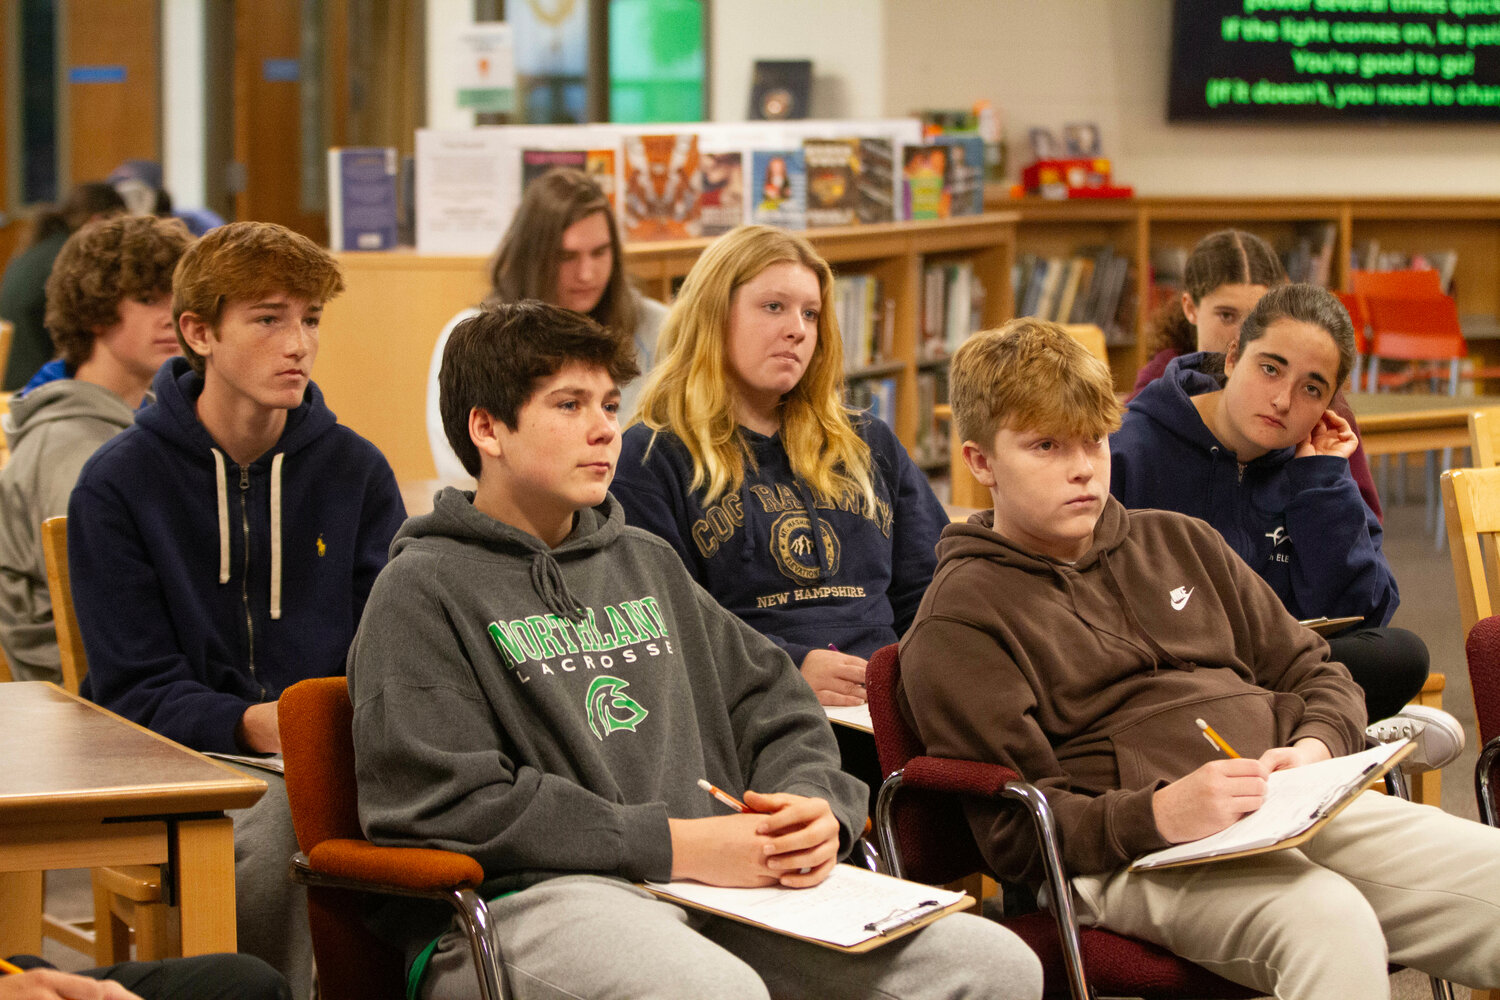 Jack Casey, Max Bilotta, Elizabeth Burchard, Logan Craft, and Blaine Elrich (from left) look on during the criminal investigation class.